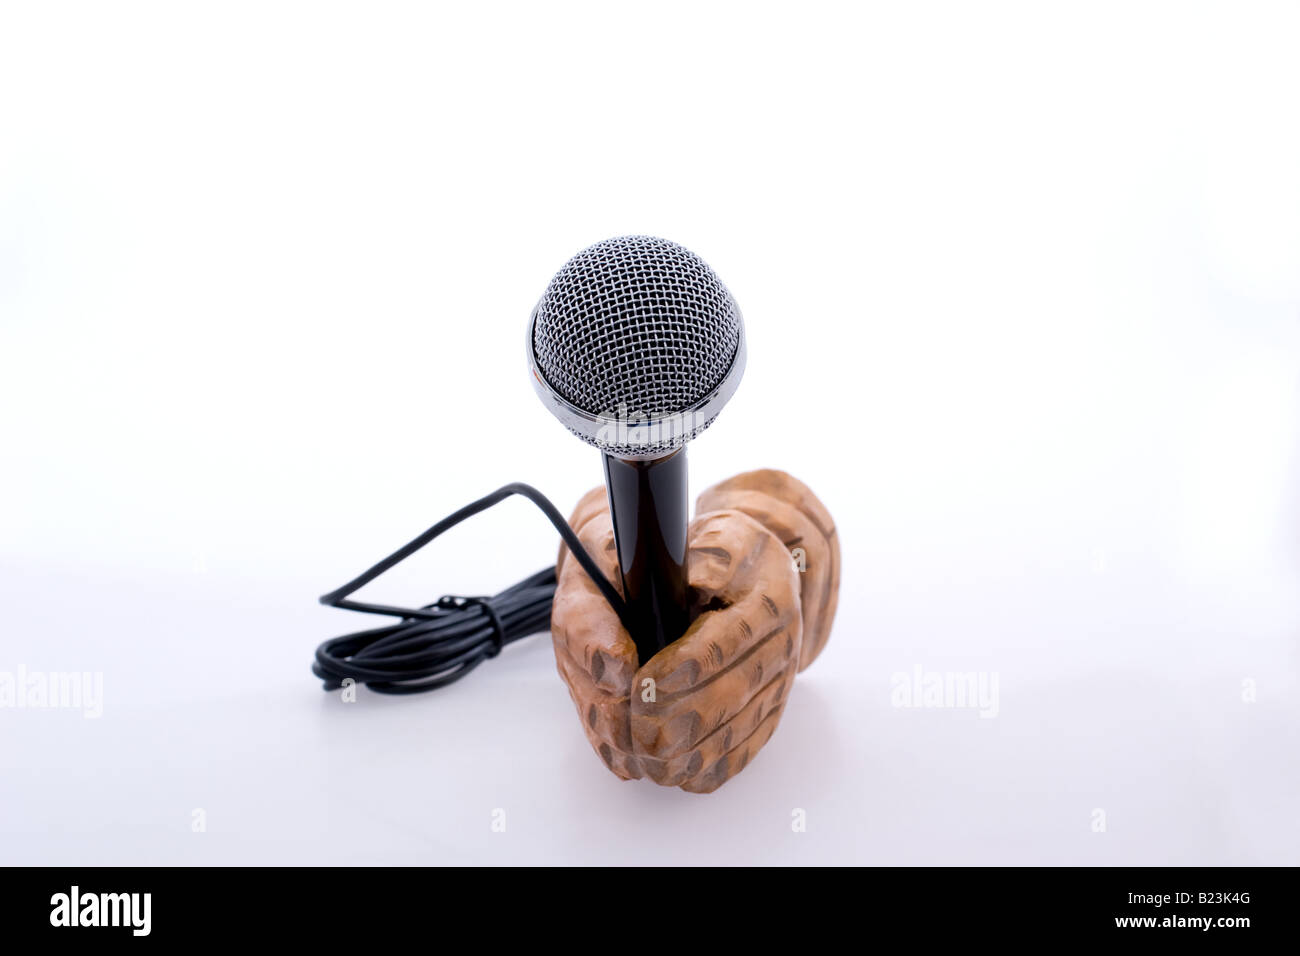 Wooden hands holding an old-fashioned microphone Stock Photo